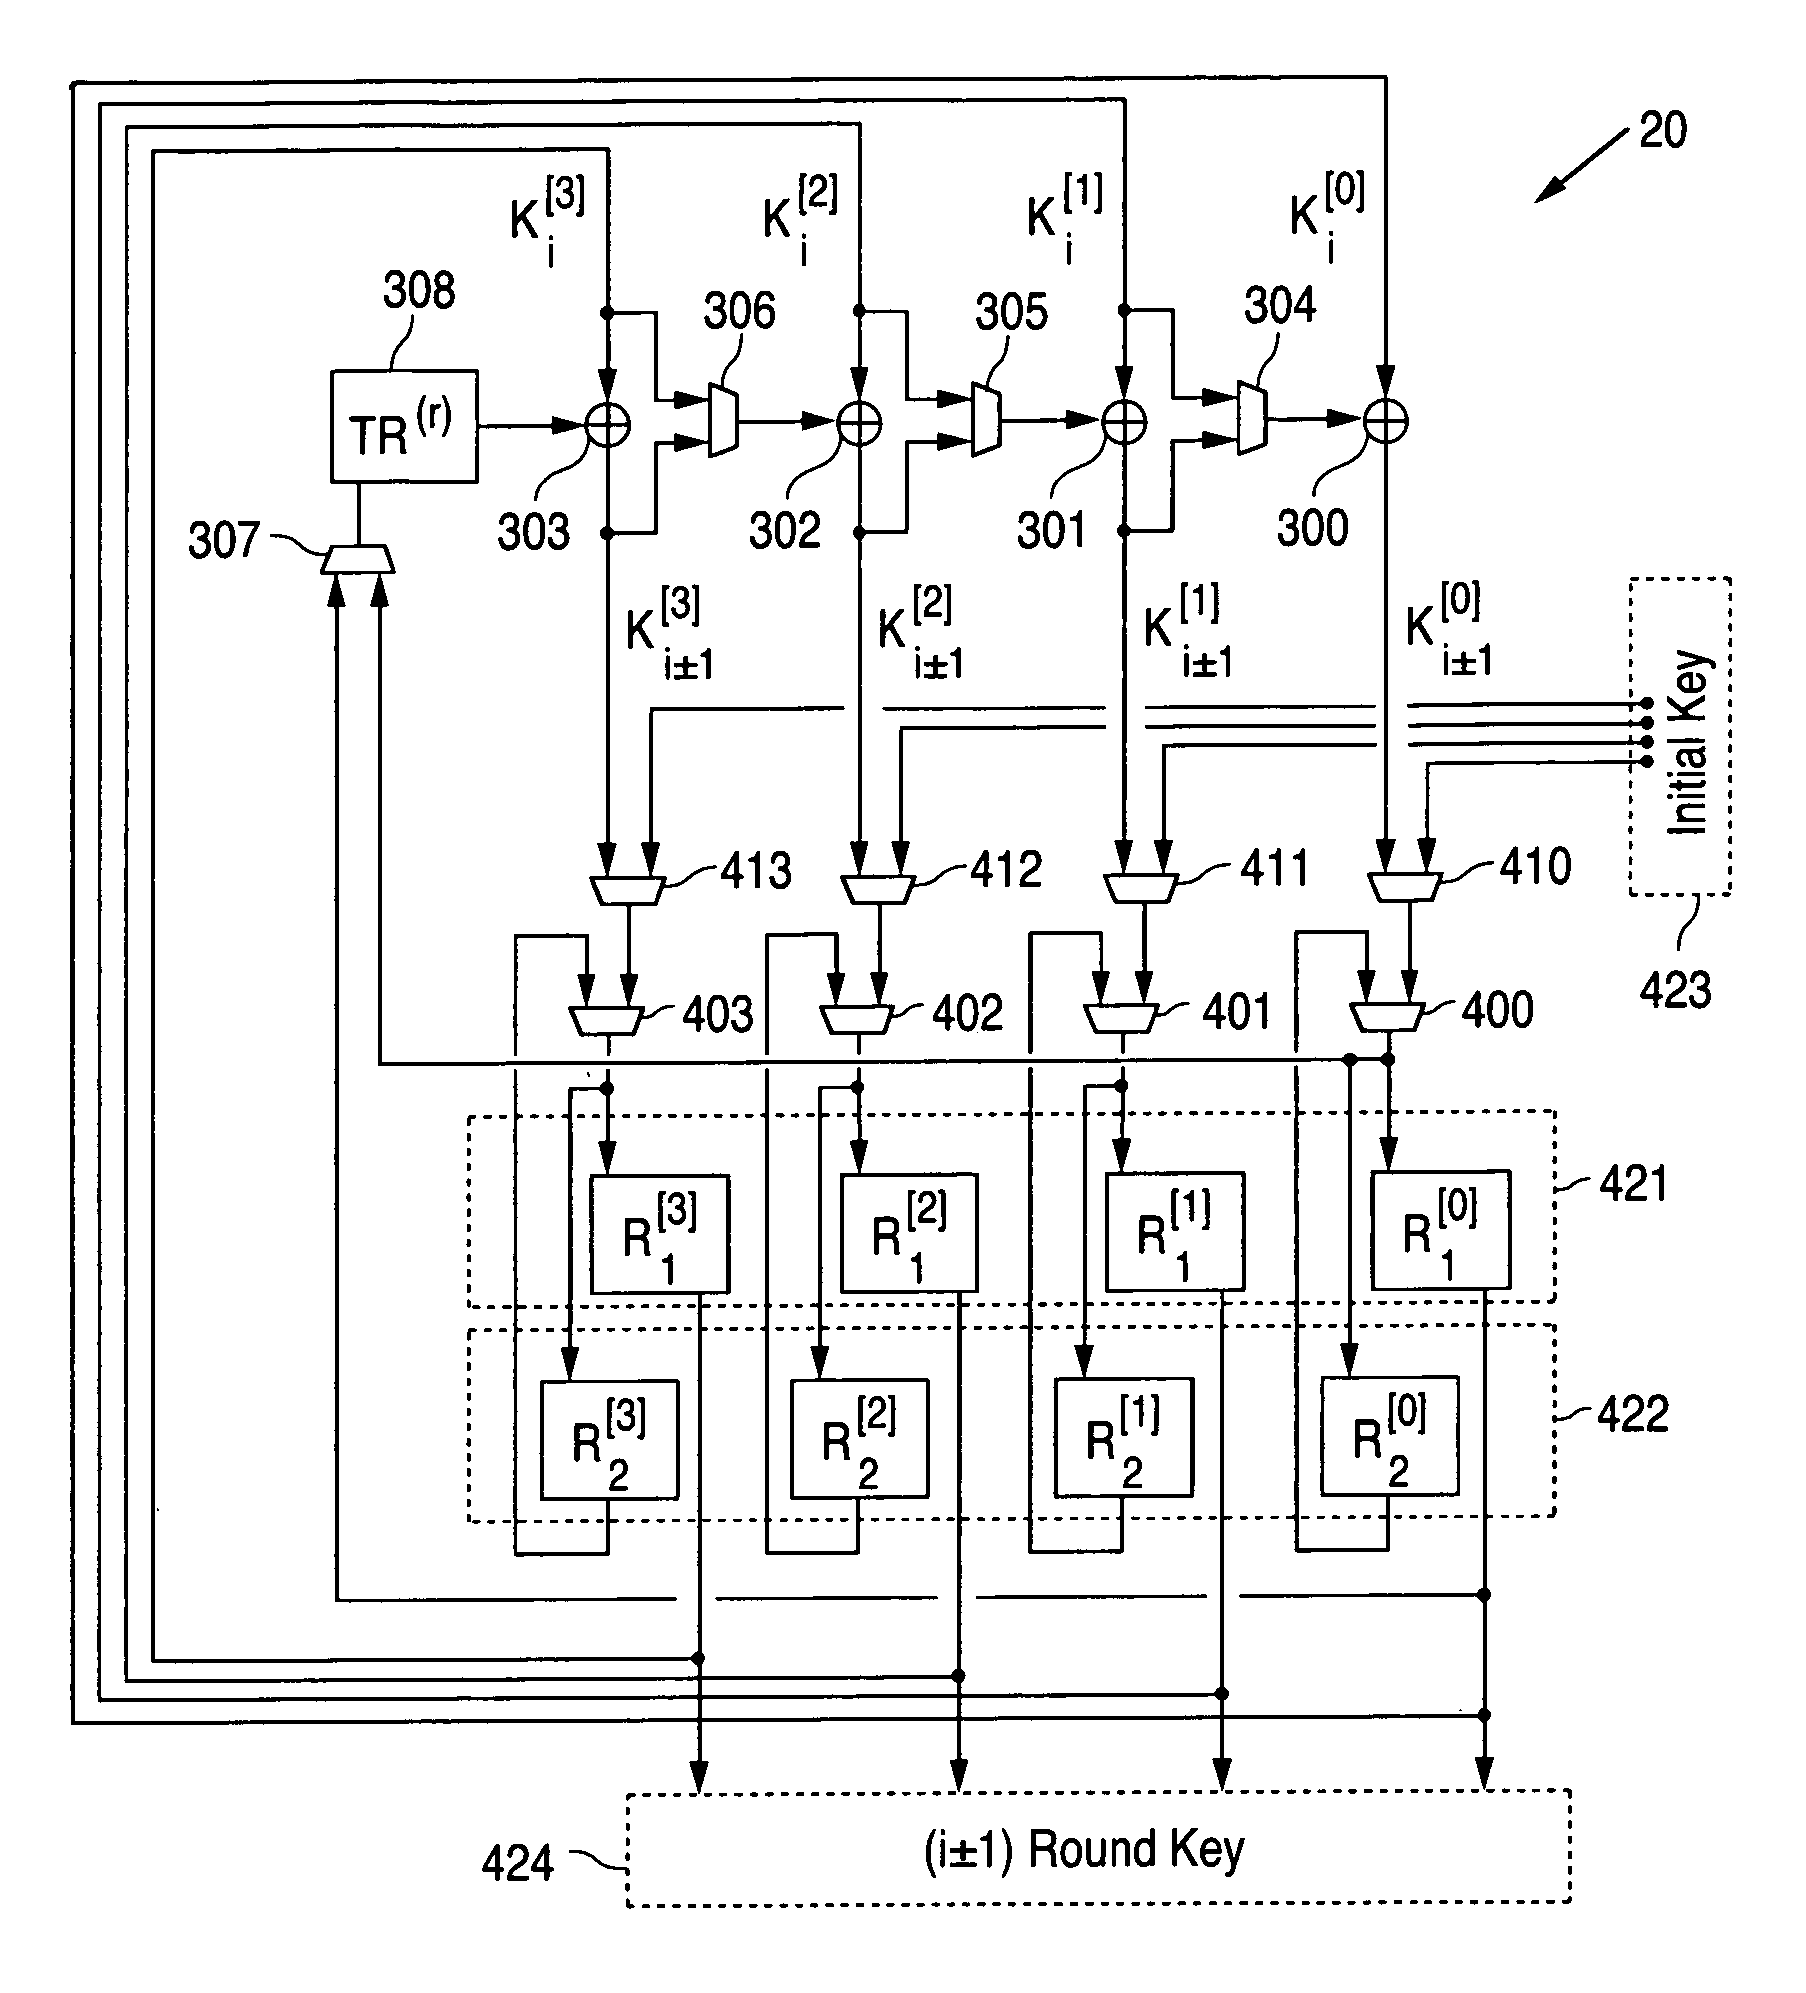 Apparatus and method for key scheduling